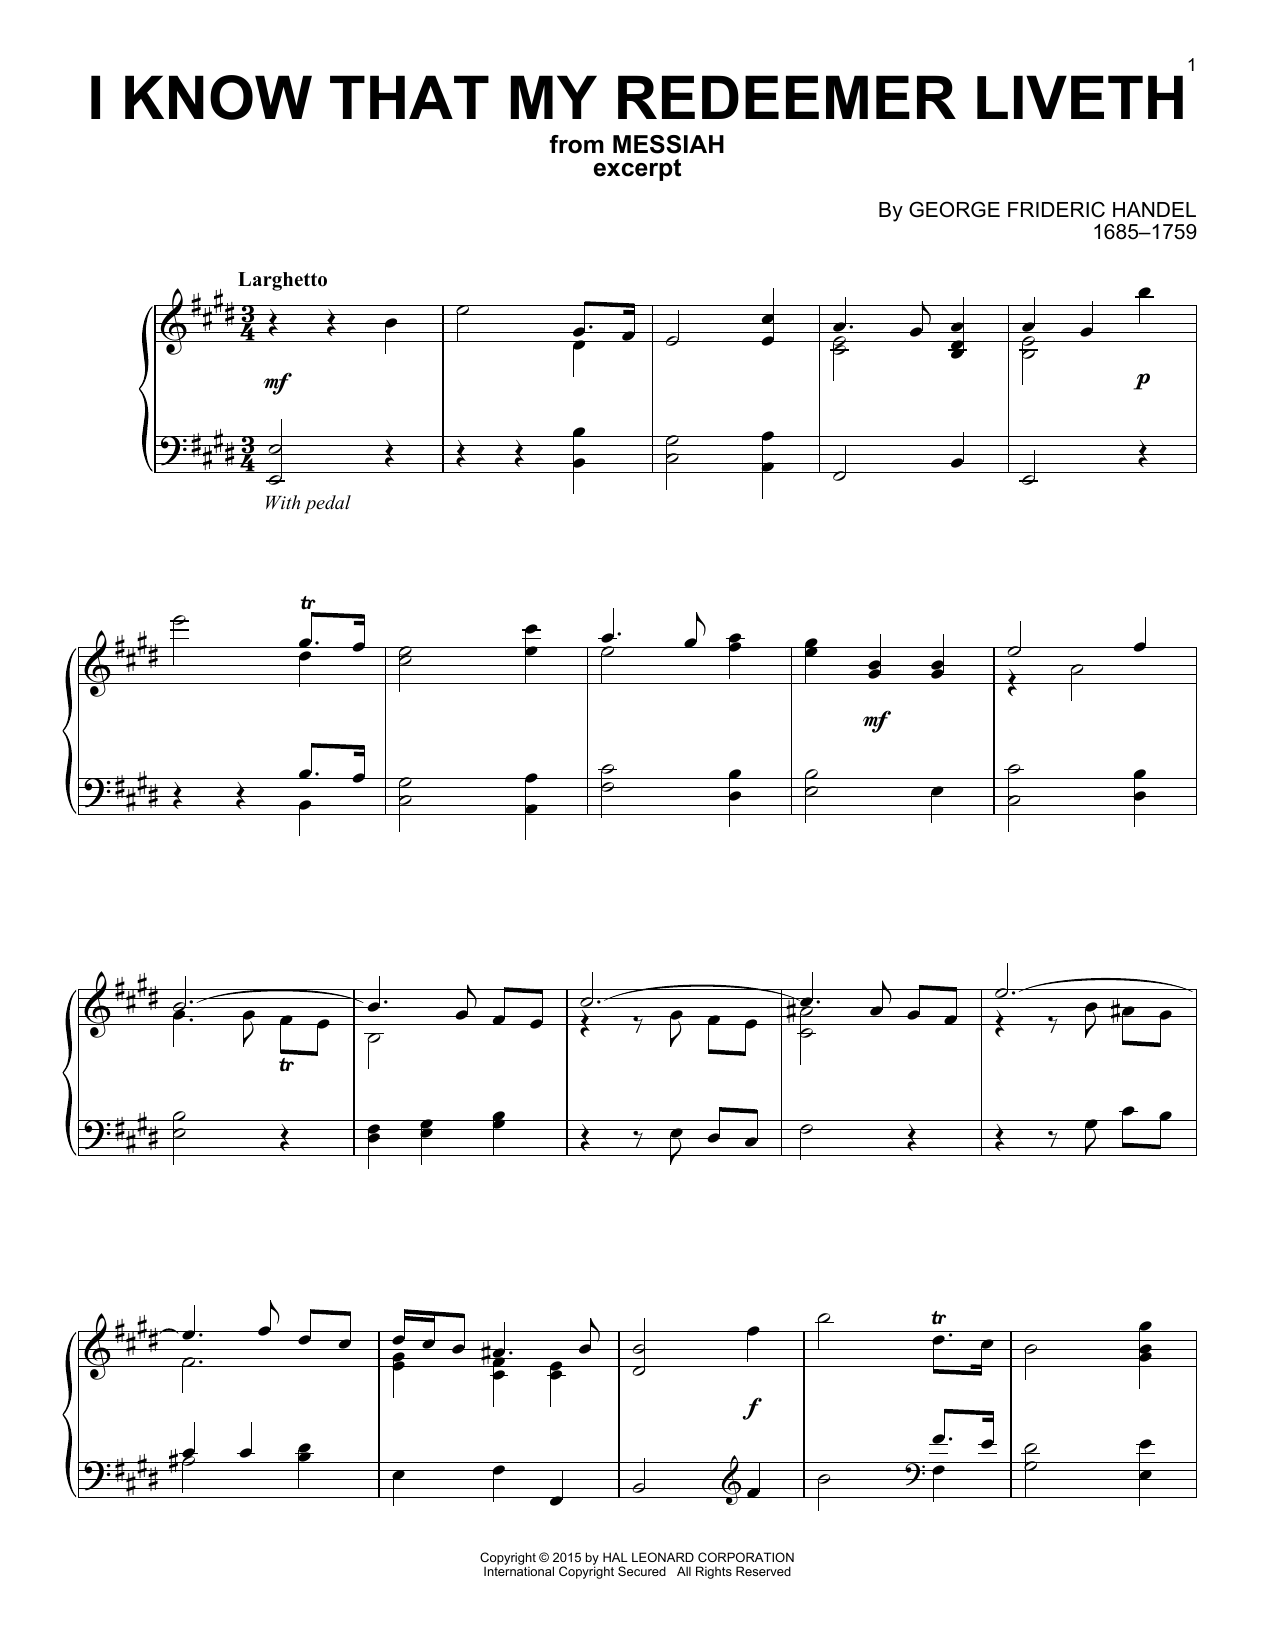 Download George Frideric Handel I Know That My Redeemer Liveth Sheet Music